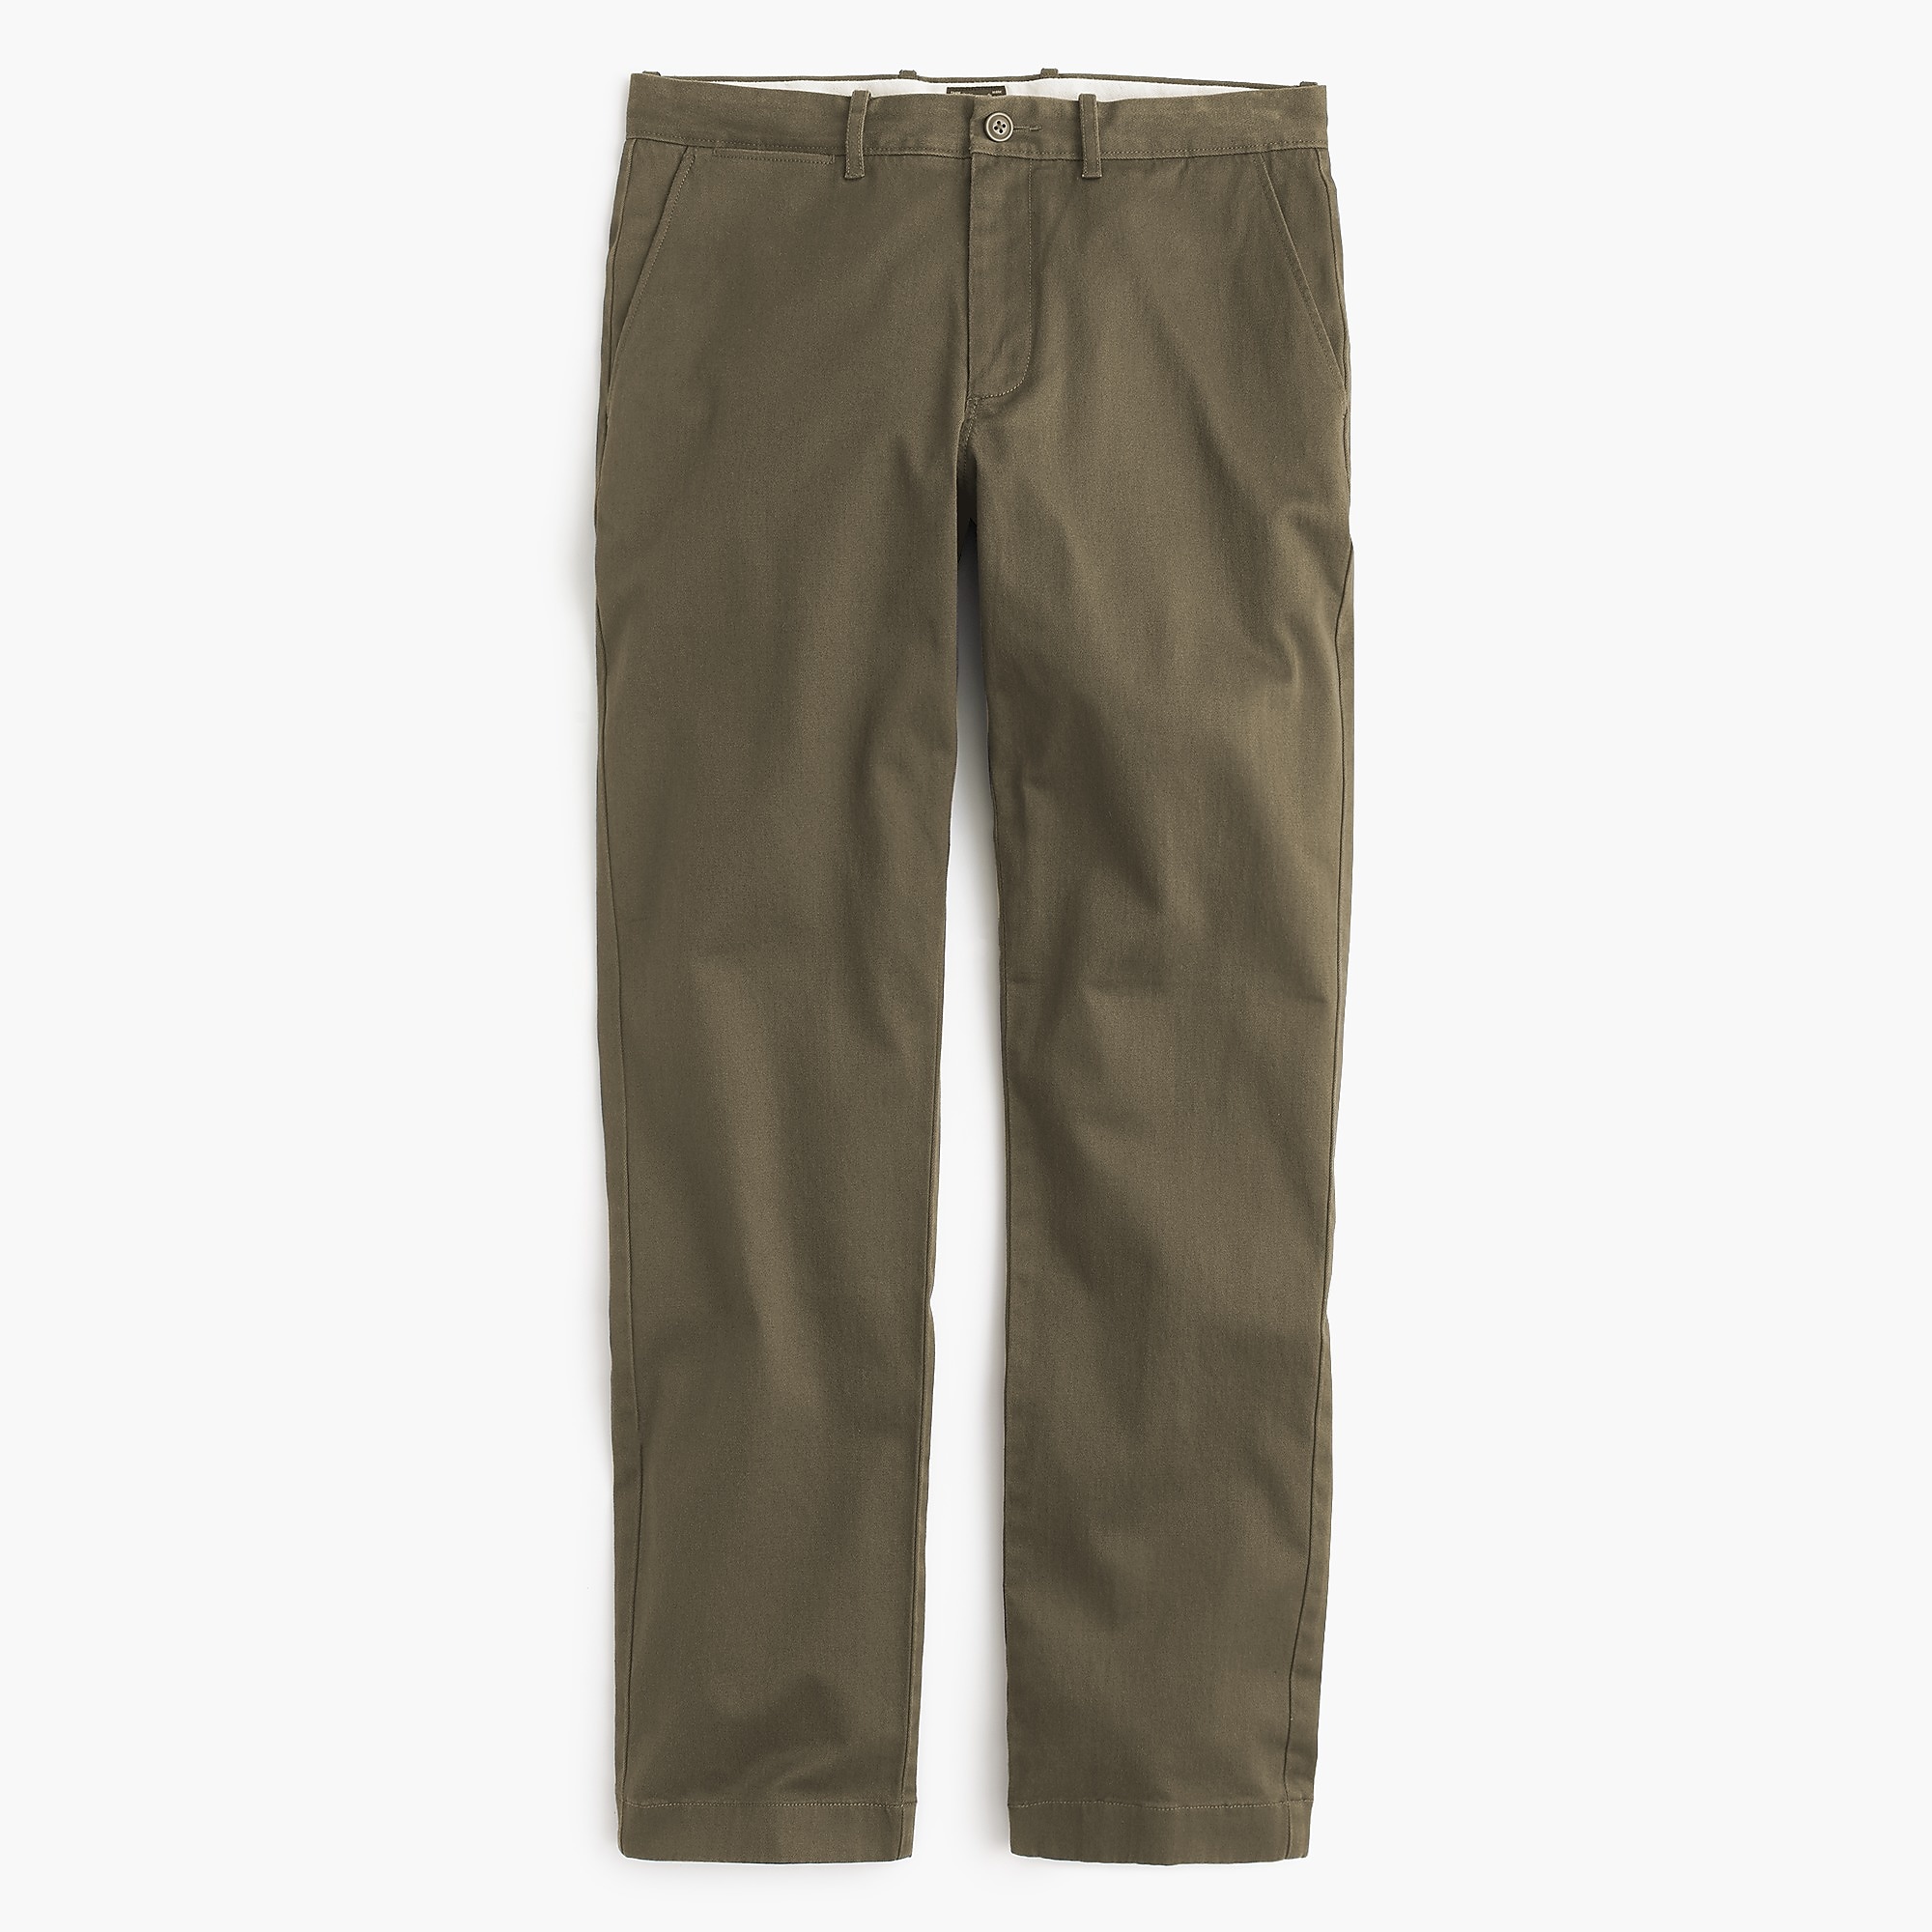 Men's Stretch Chino In 1040 Athletic Fit - Men's Pants